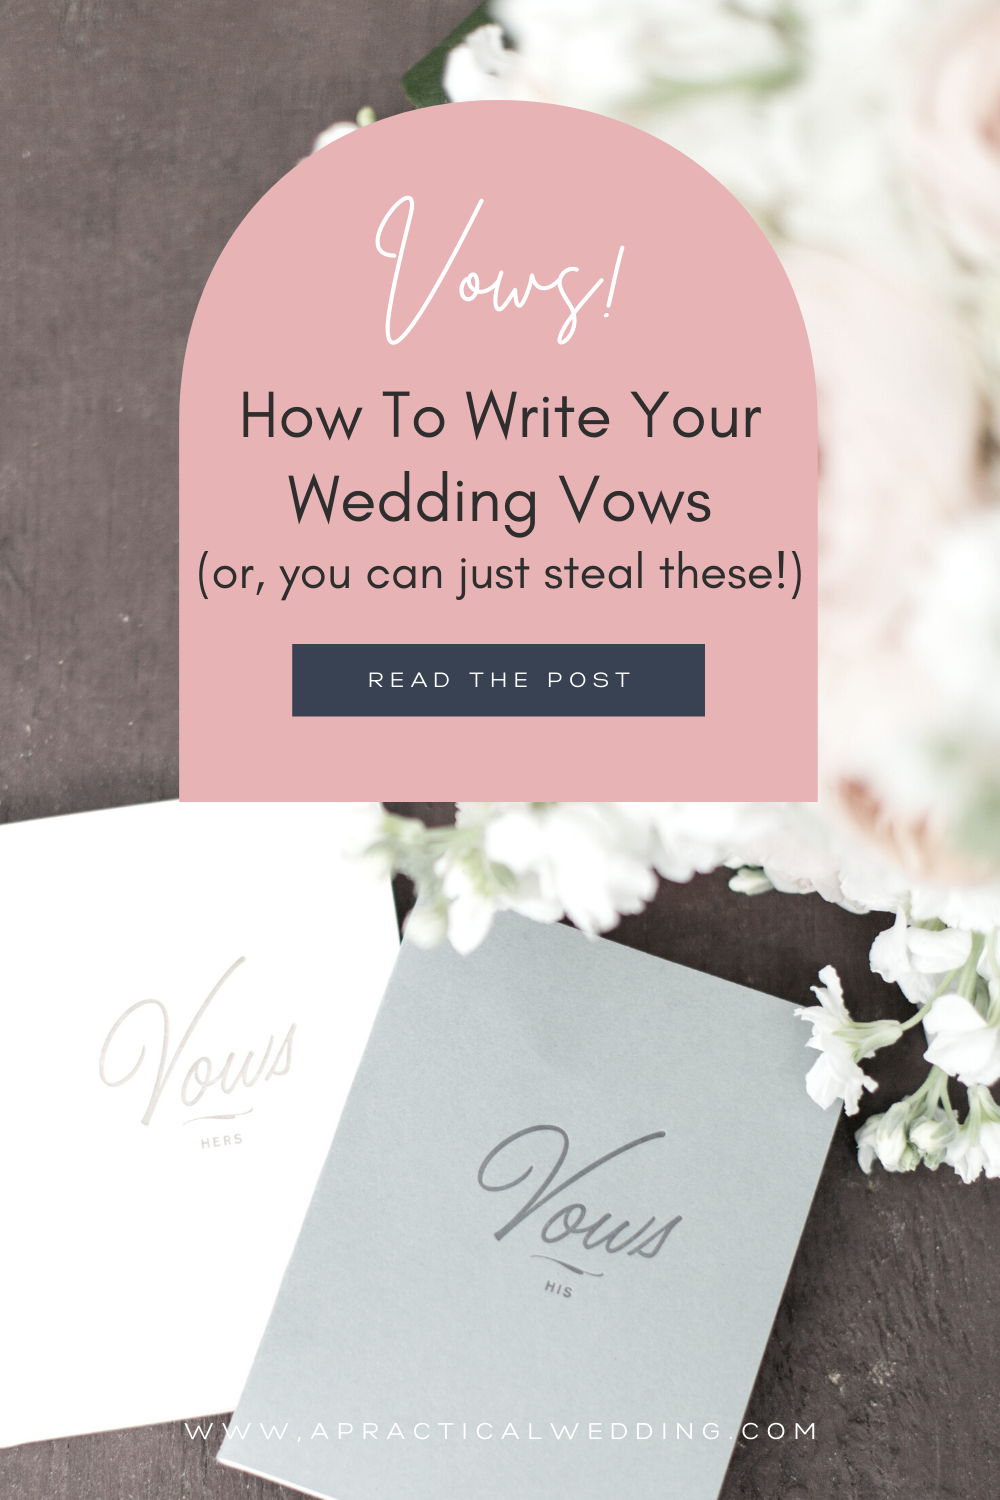 Image of wedding vow books with text that says: "Vows! How to write your wedding vows (or, you can just steal these!)